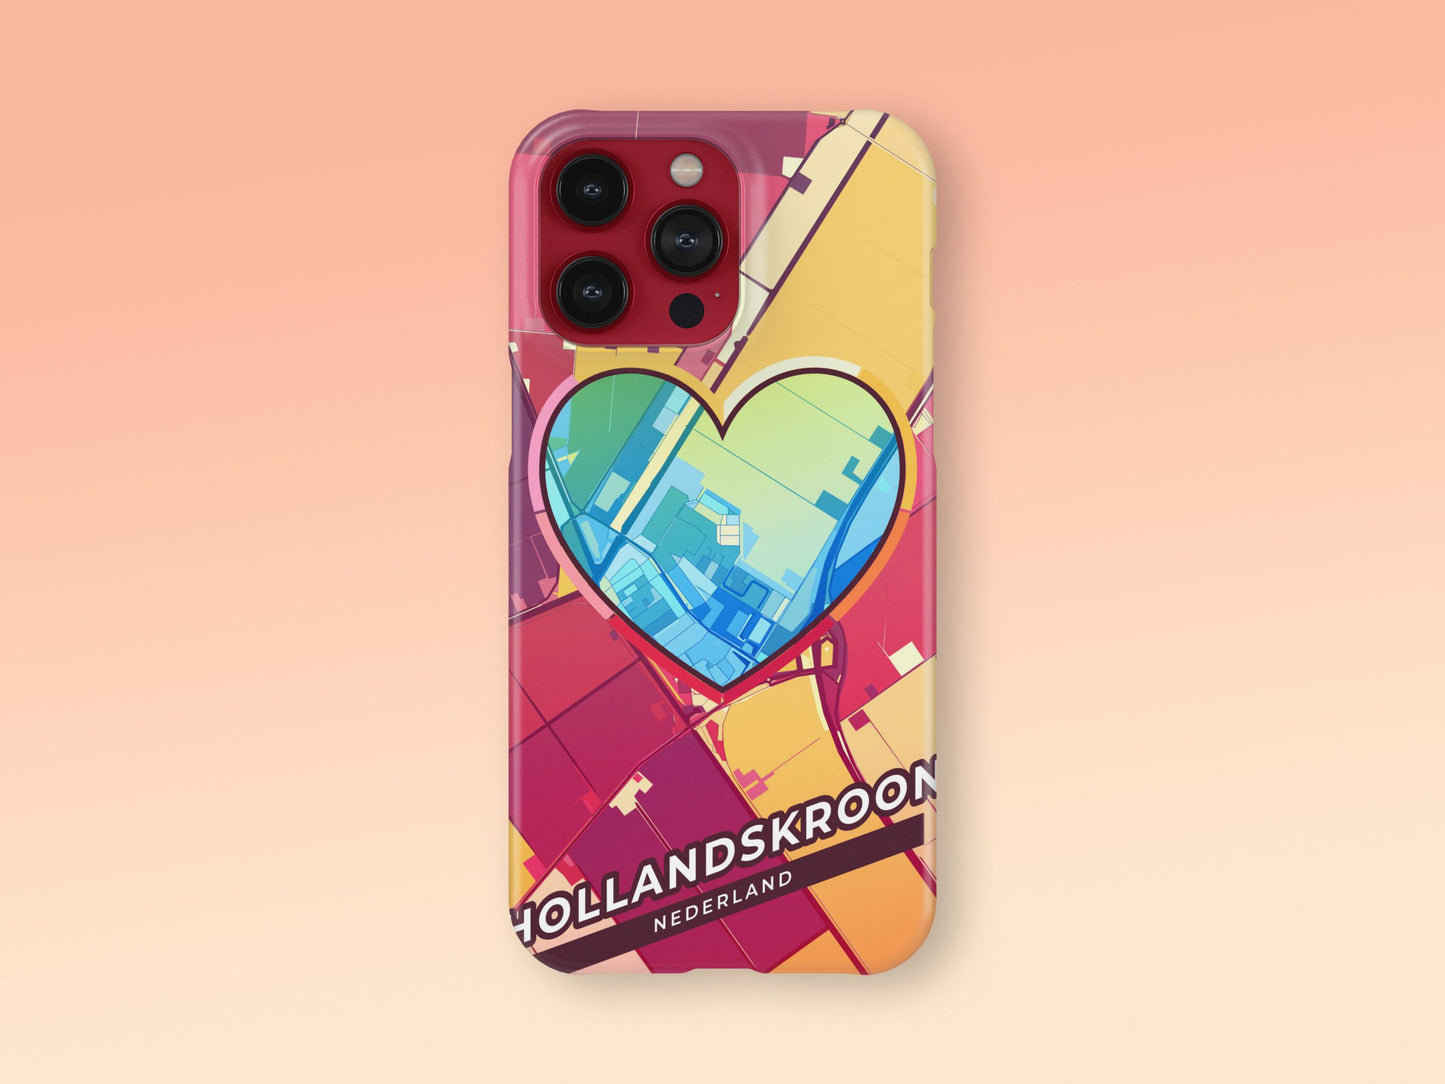 Hollands Kroon Netherlands slim phone case with colorful icon. Birthday, wedding or housewarming gift. Couple match cases. 2